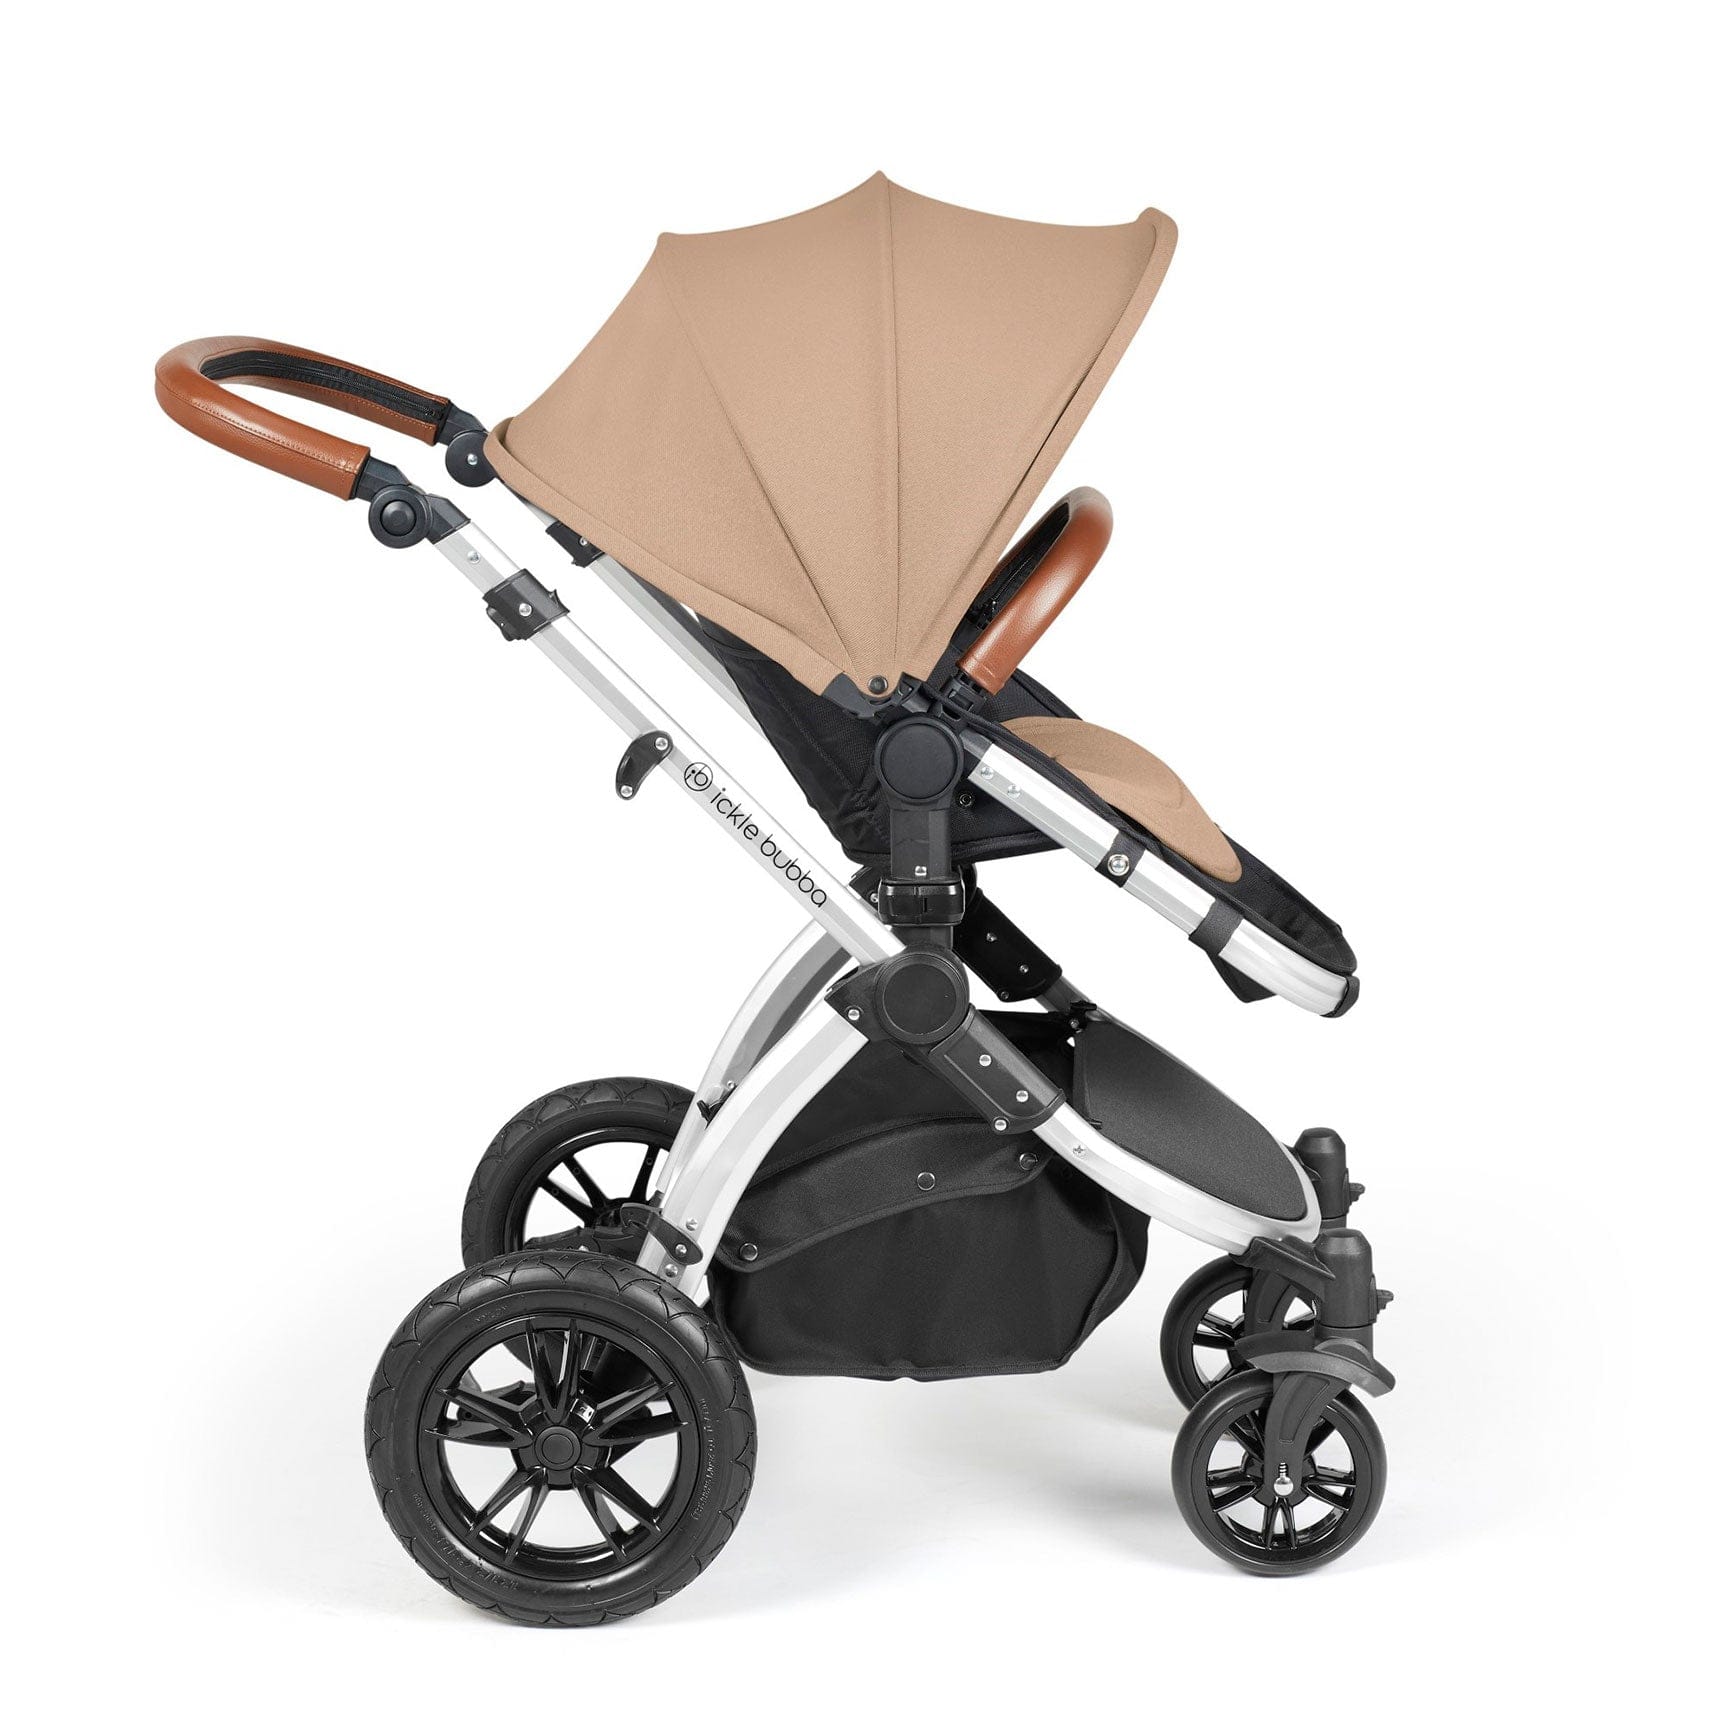 Ickle Bubba Stomp Luxe All-in-One Travel System with Isofix Base in Silver/Desert/Tan Travel Systems 10-011-300-258 5056515026580